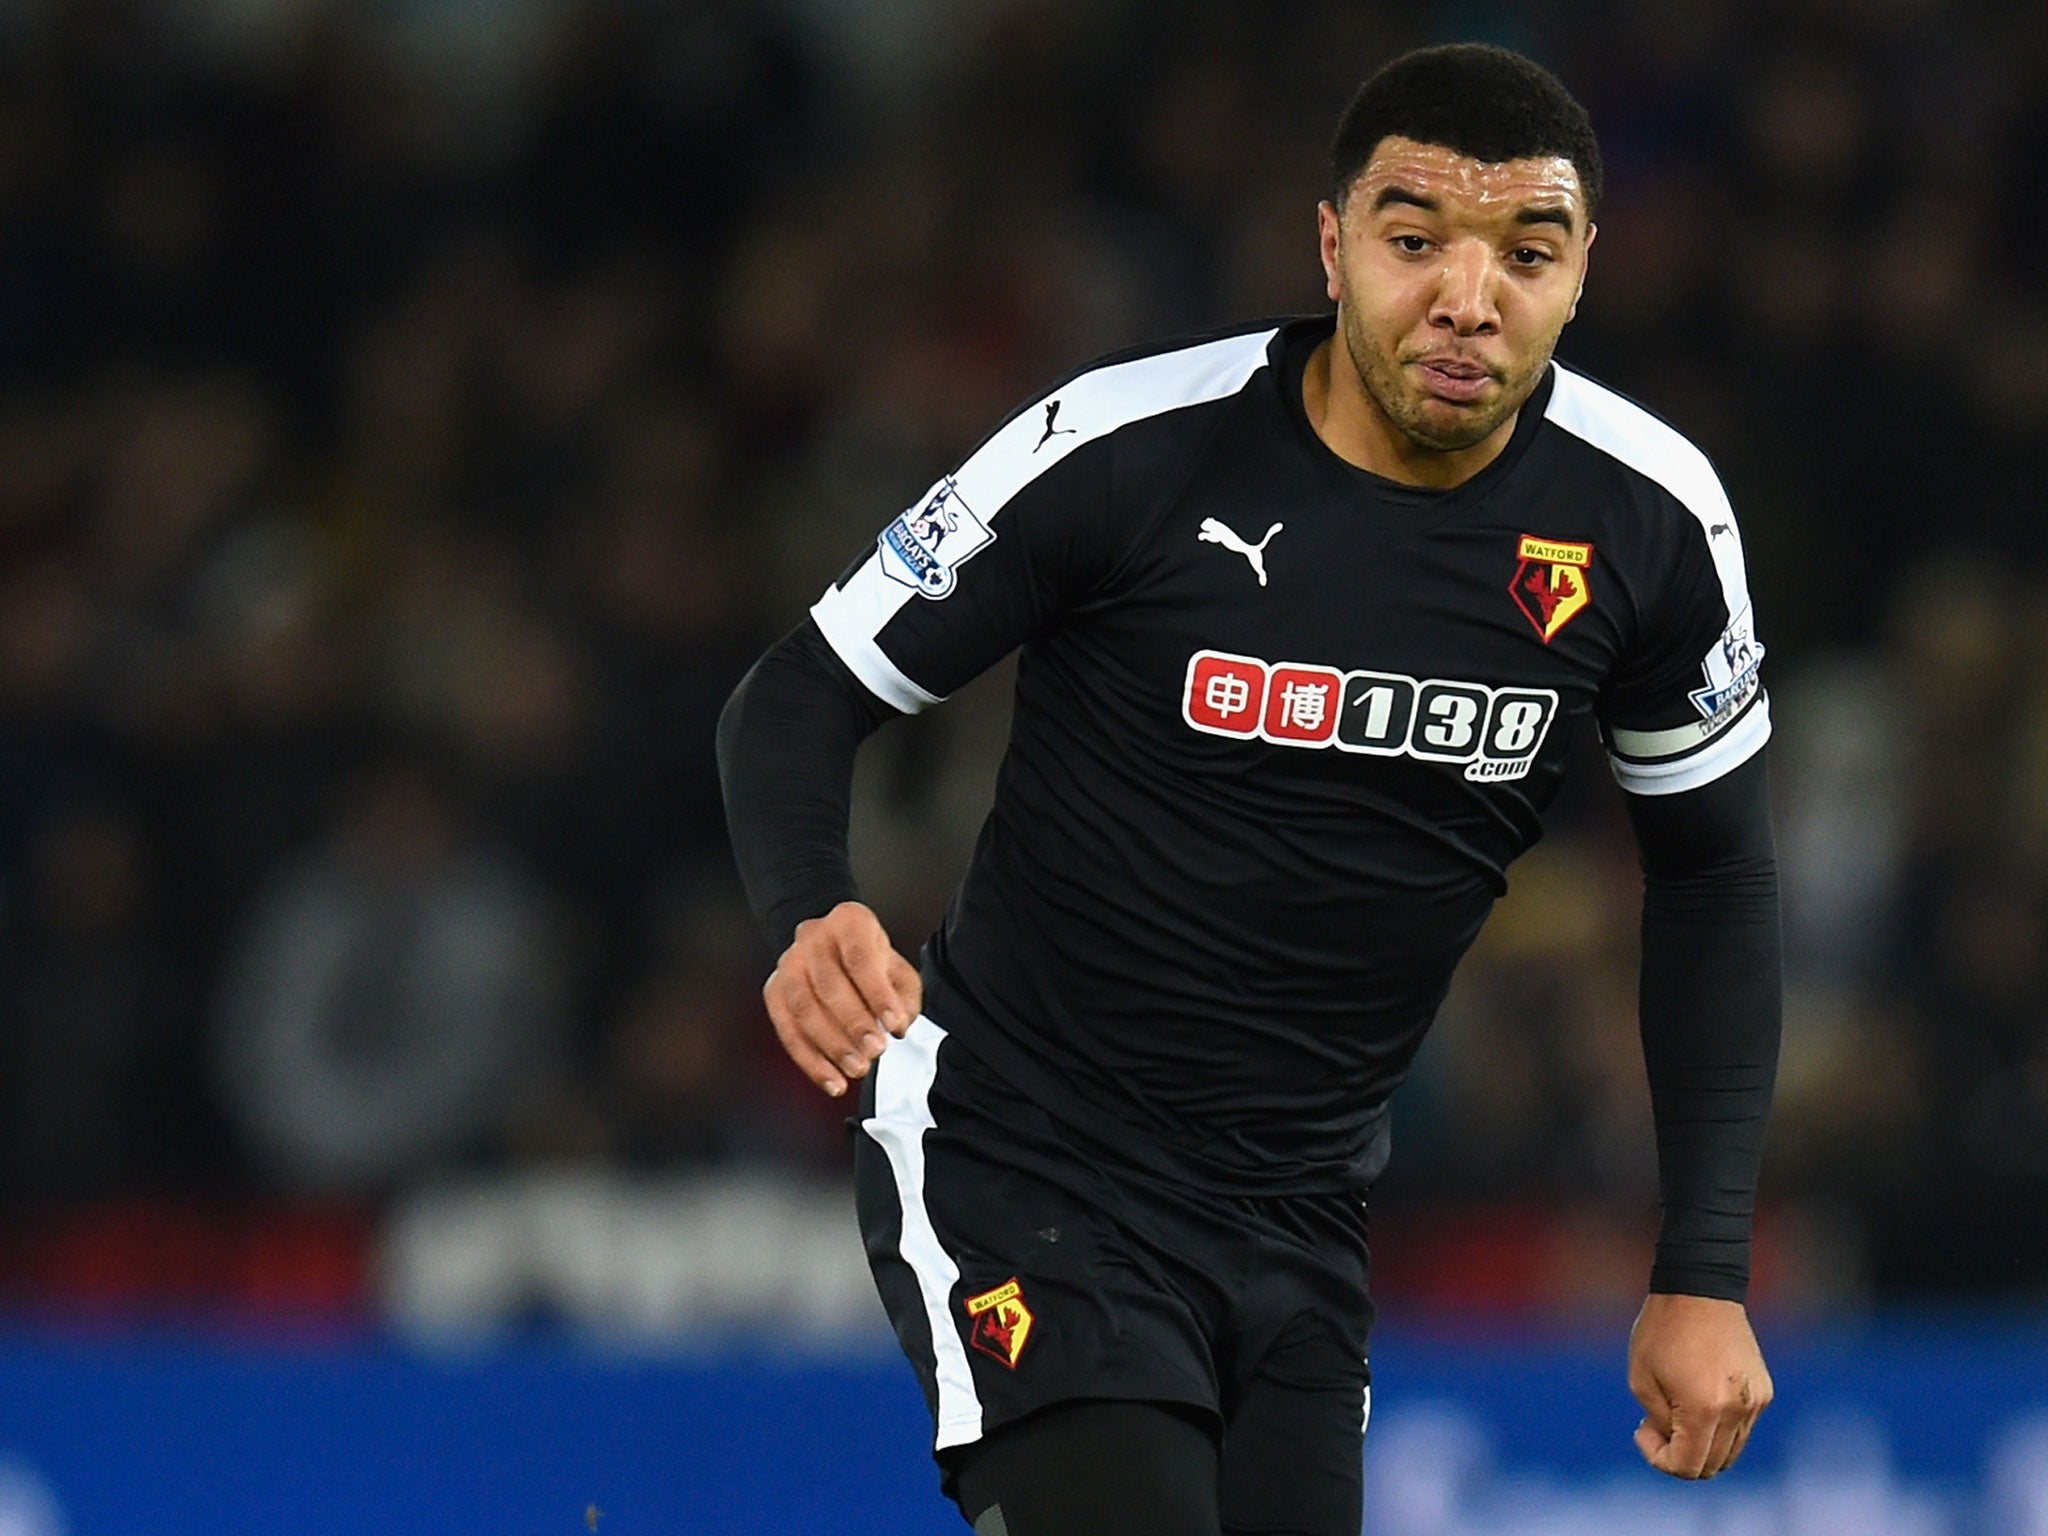 Watford captain Troy Deeney starts against Crystal Palace